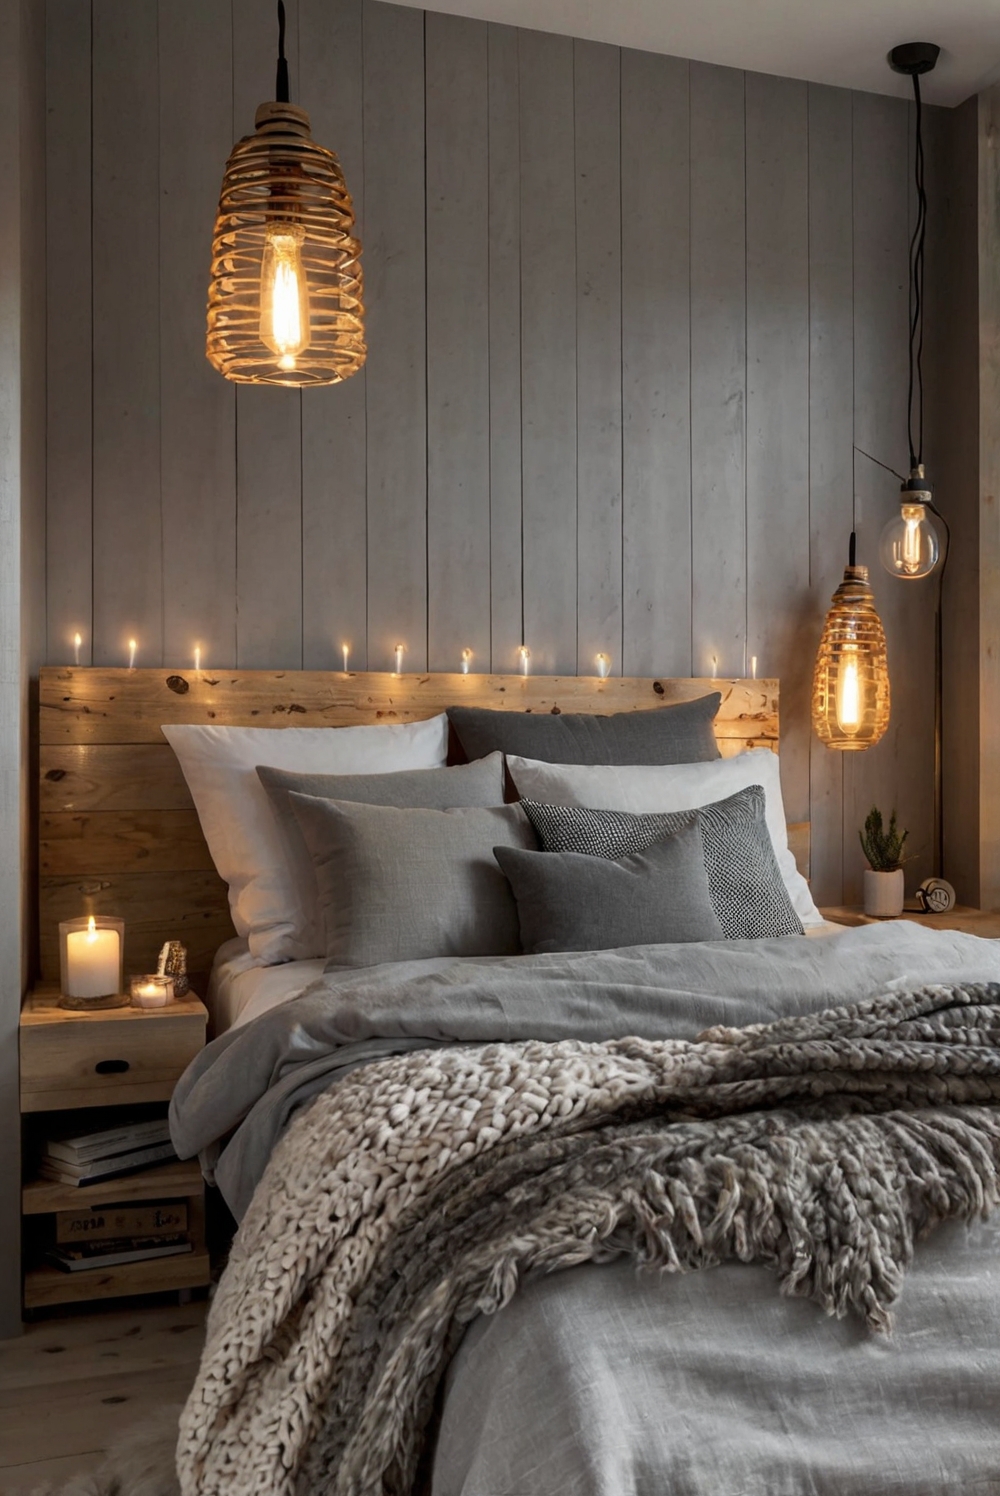 Why should you install bedside lamps for reading and ambient lighting?